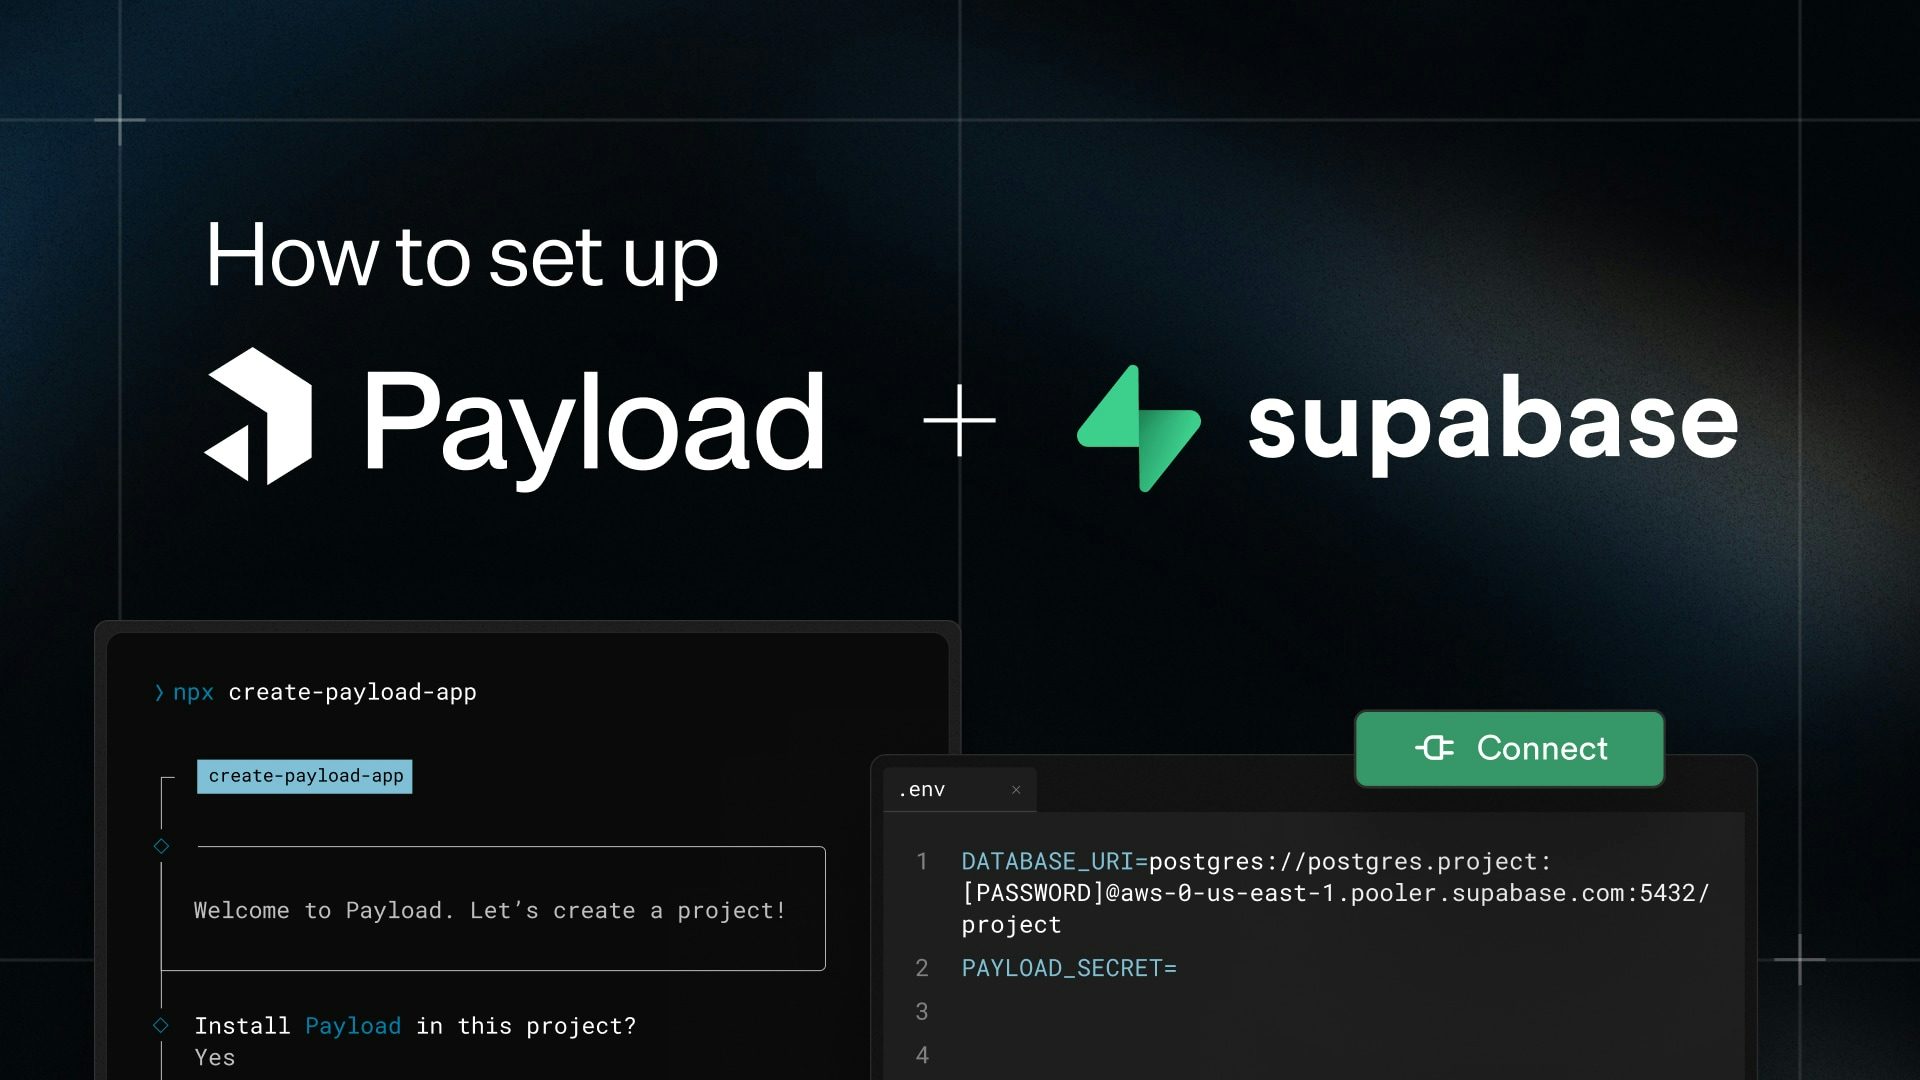 How to set up Payload and Supabase